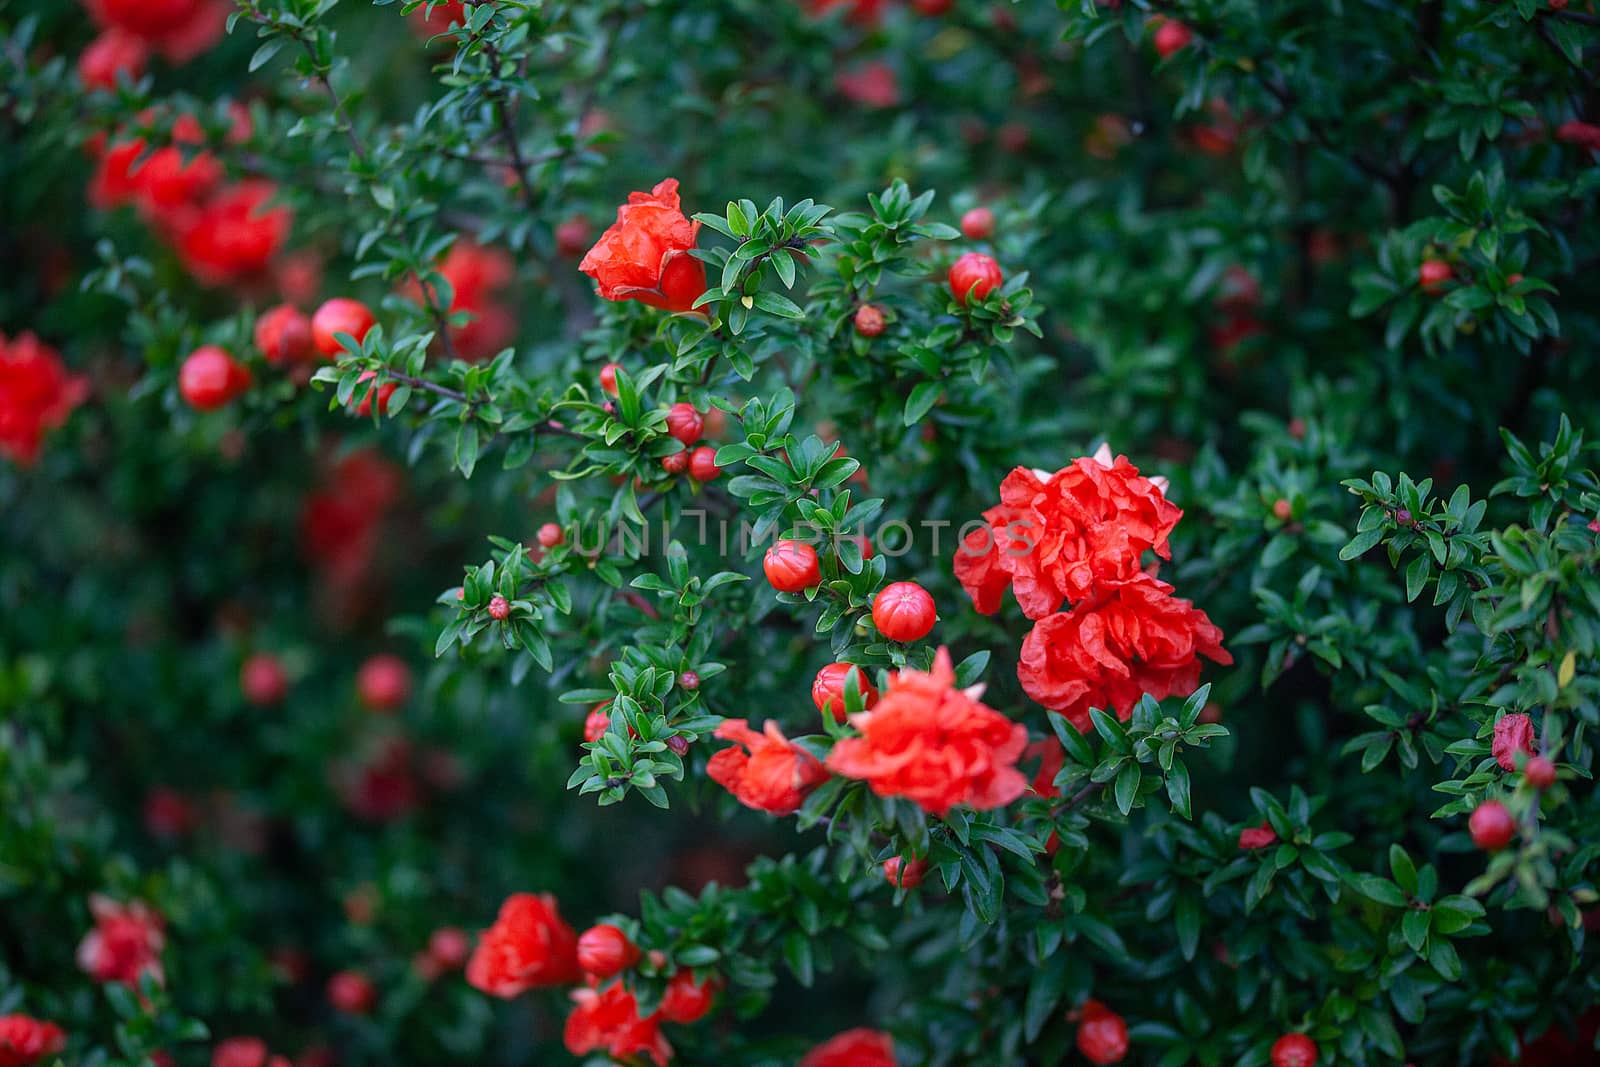 Pomegranate tree in the garden by Angorius